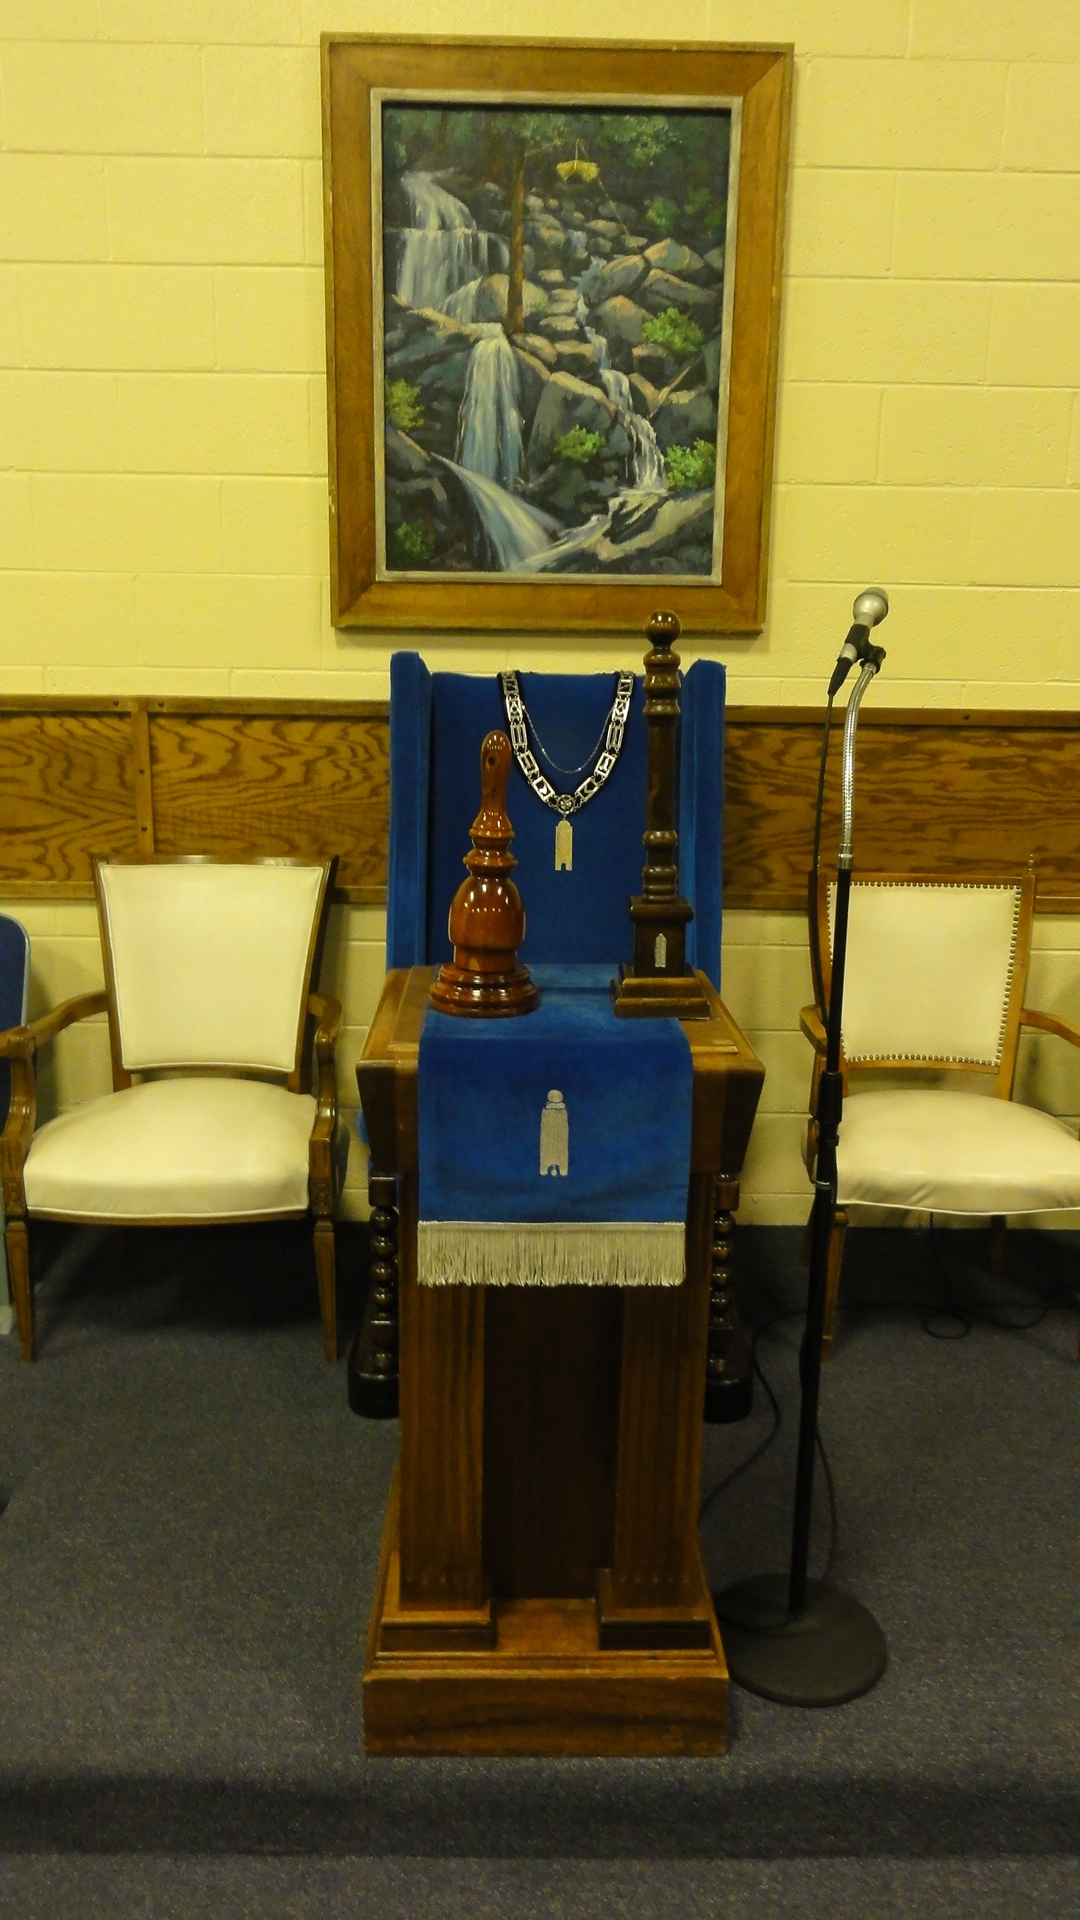 The Chair in the South, with jewel, apron, pillar, and gavel.